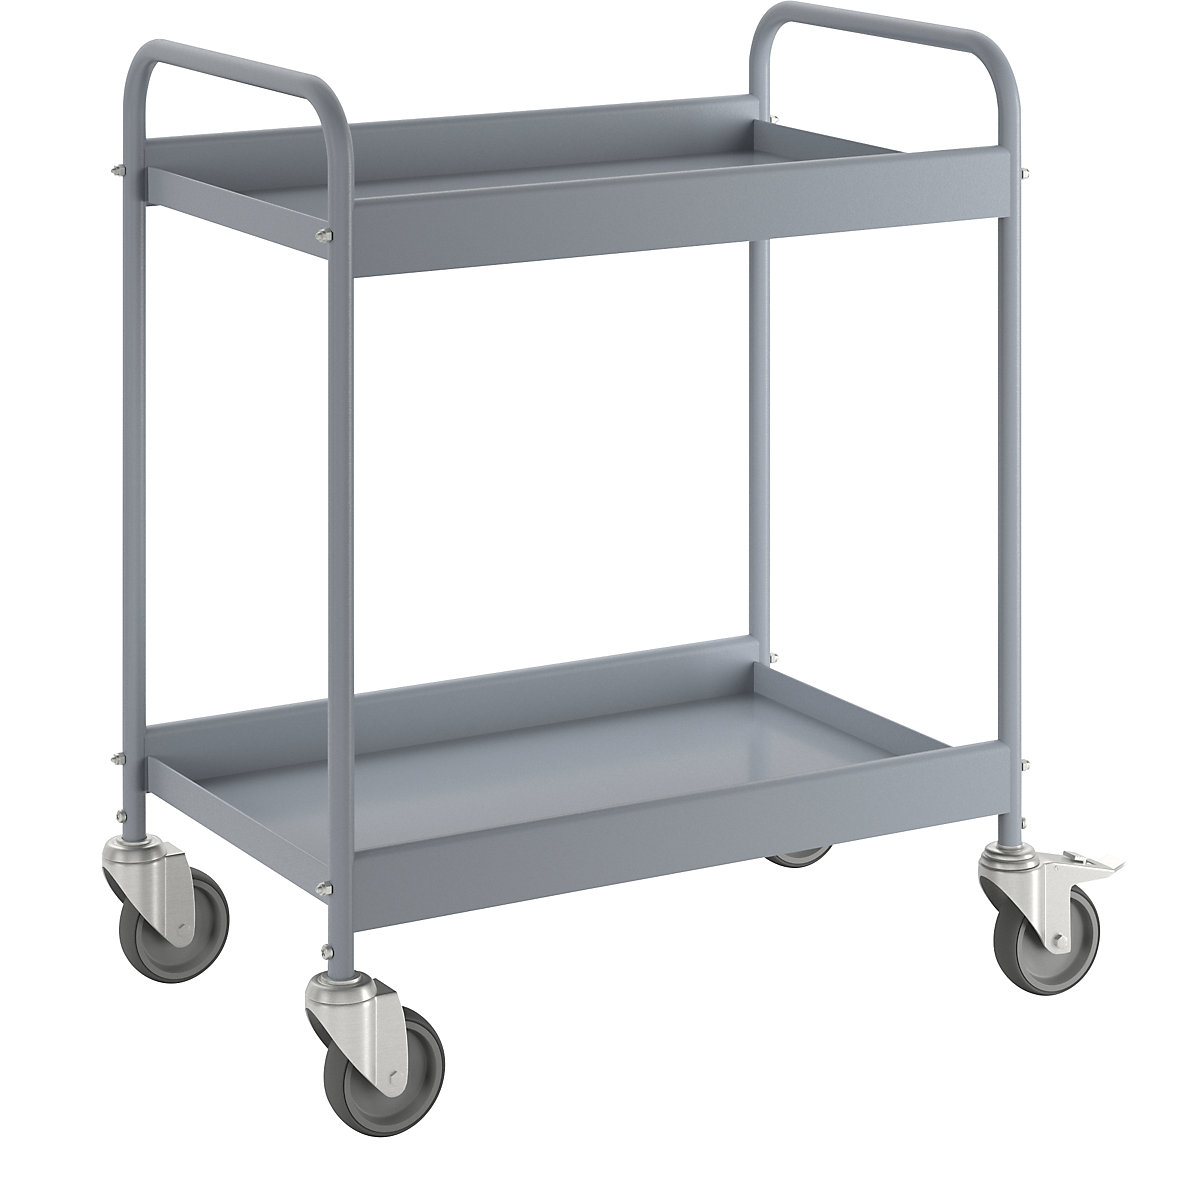 Table trolley, powder coated tubular steel, max. load 40 kg, 2 shelves, silver grey RAL 7001, 4 swivel castors, 2 with double stops-1